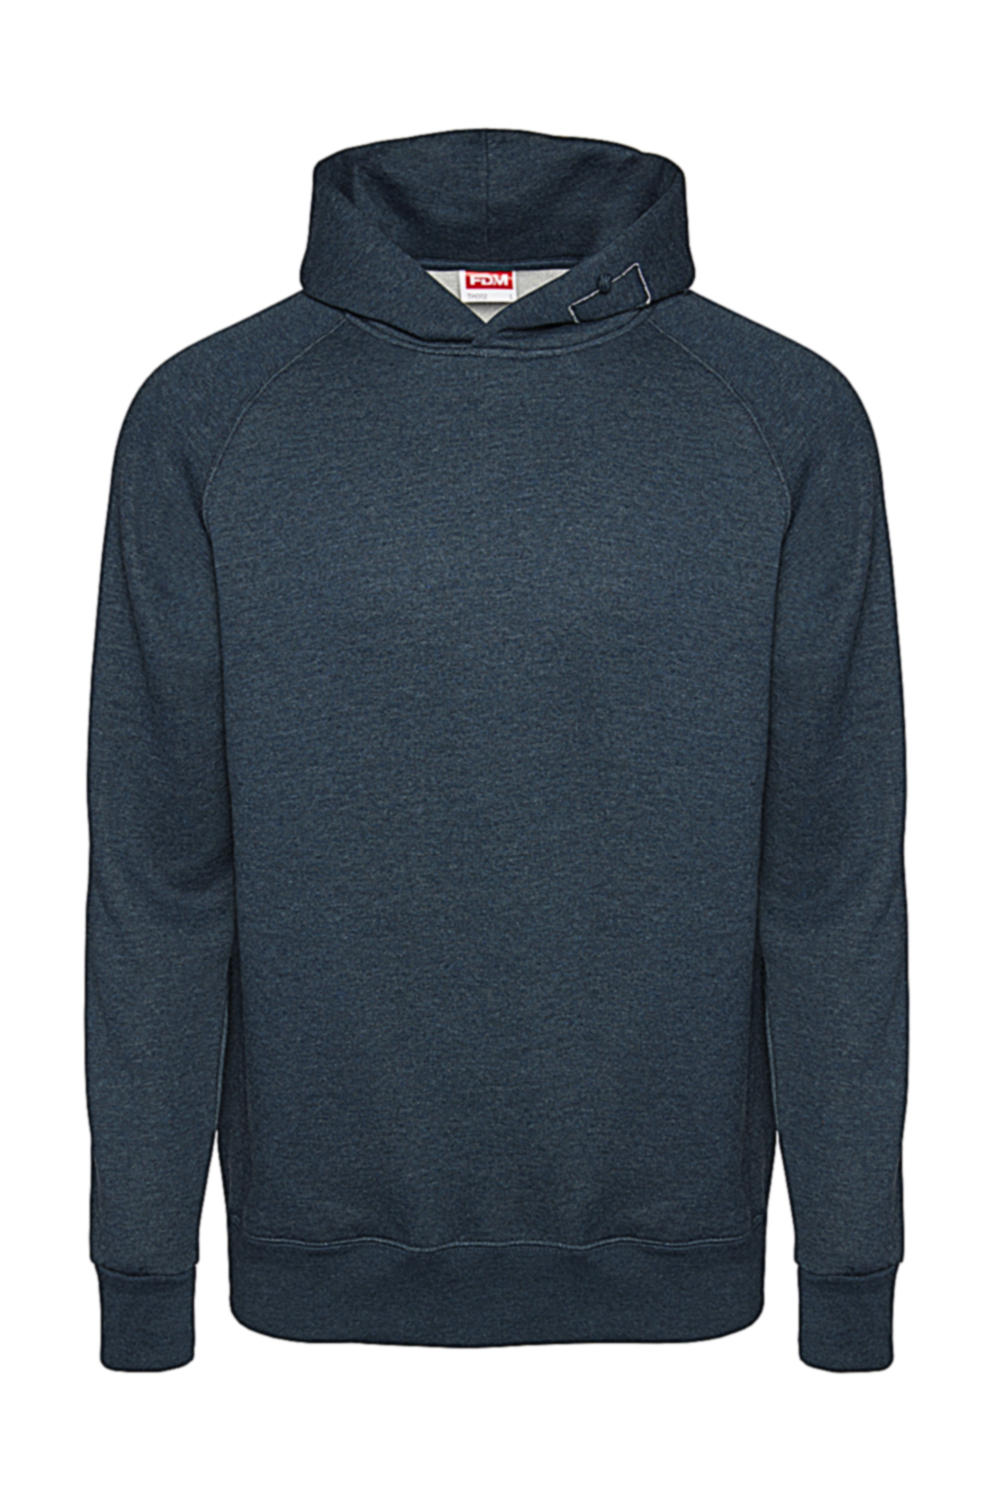  Tagless Media Hoodie in Farbe Heather Navy